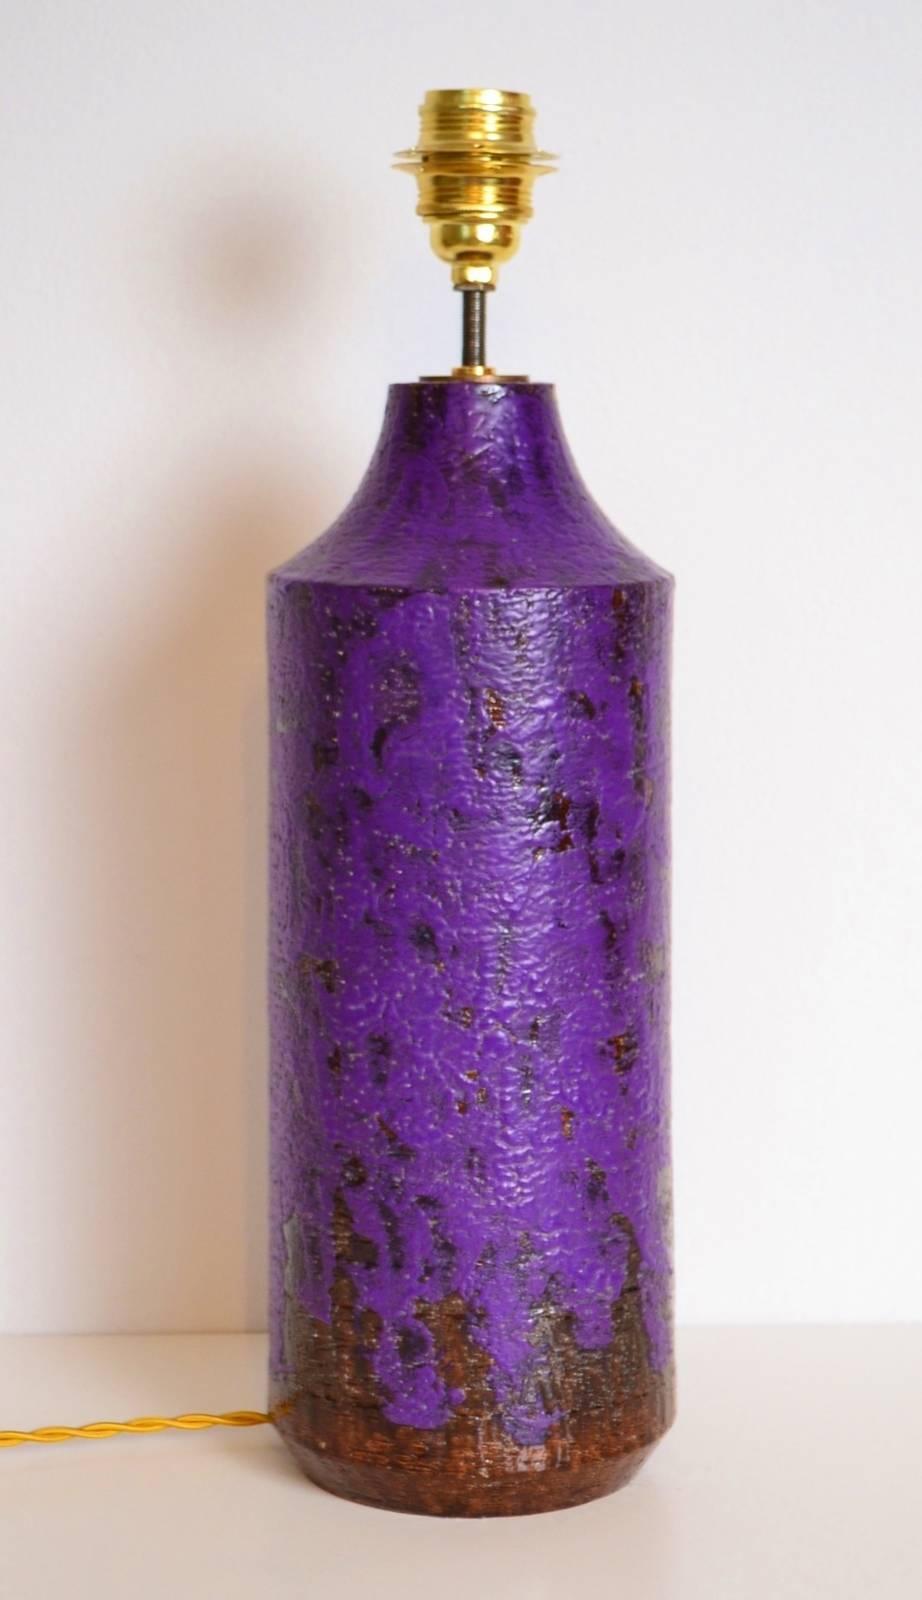 This beautiful lamp base made of heavy ceramic from Aldo Londi for Bitossi within the years 1967-1970.
The shiny purple color on brown underground is particularly beautiful and not seen that much on the vintage market.
The yellow fabric wire has